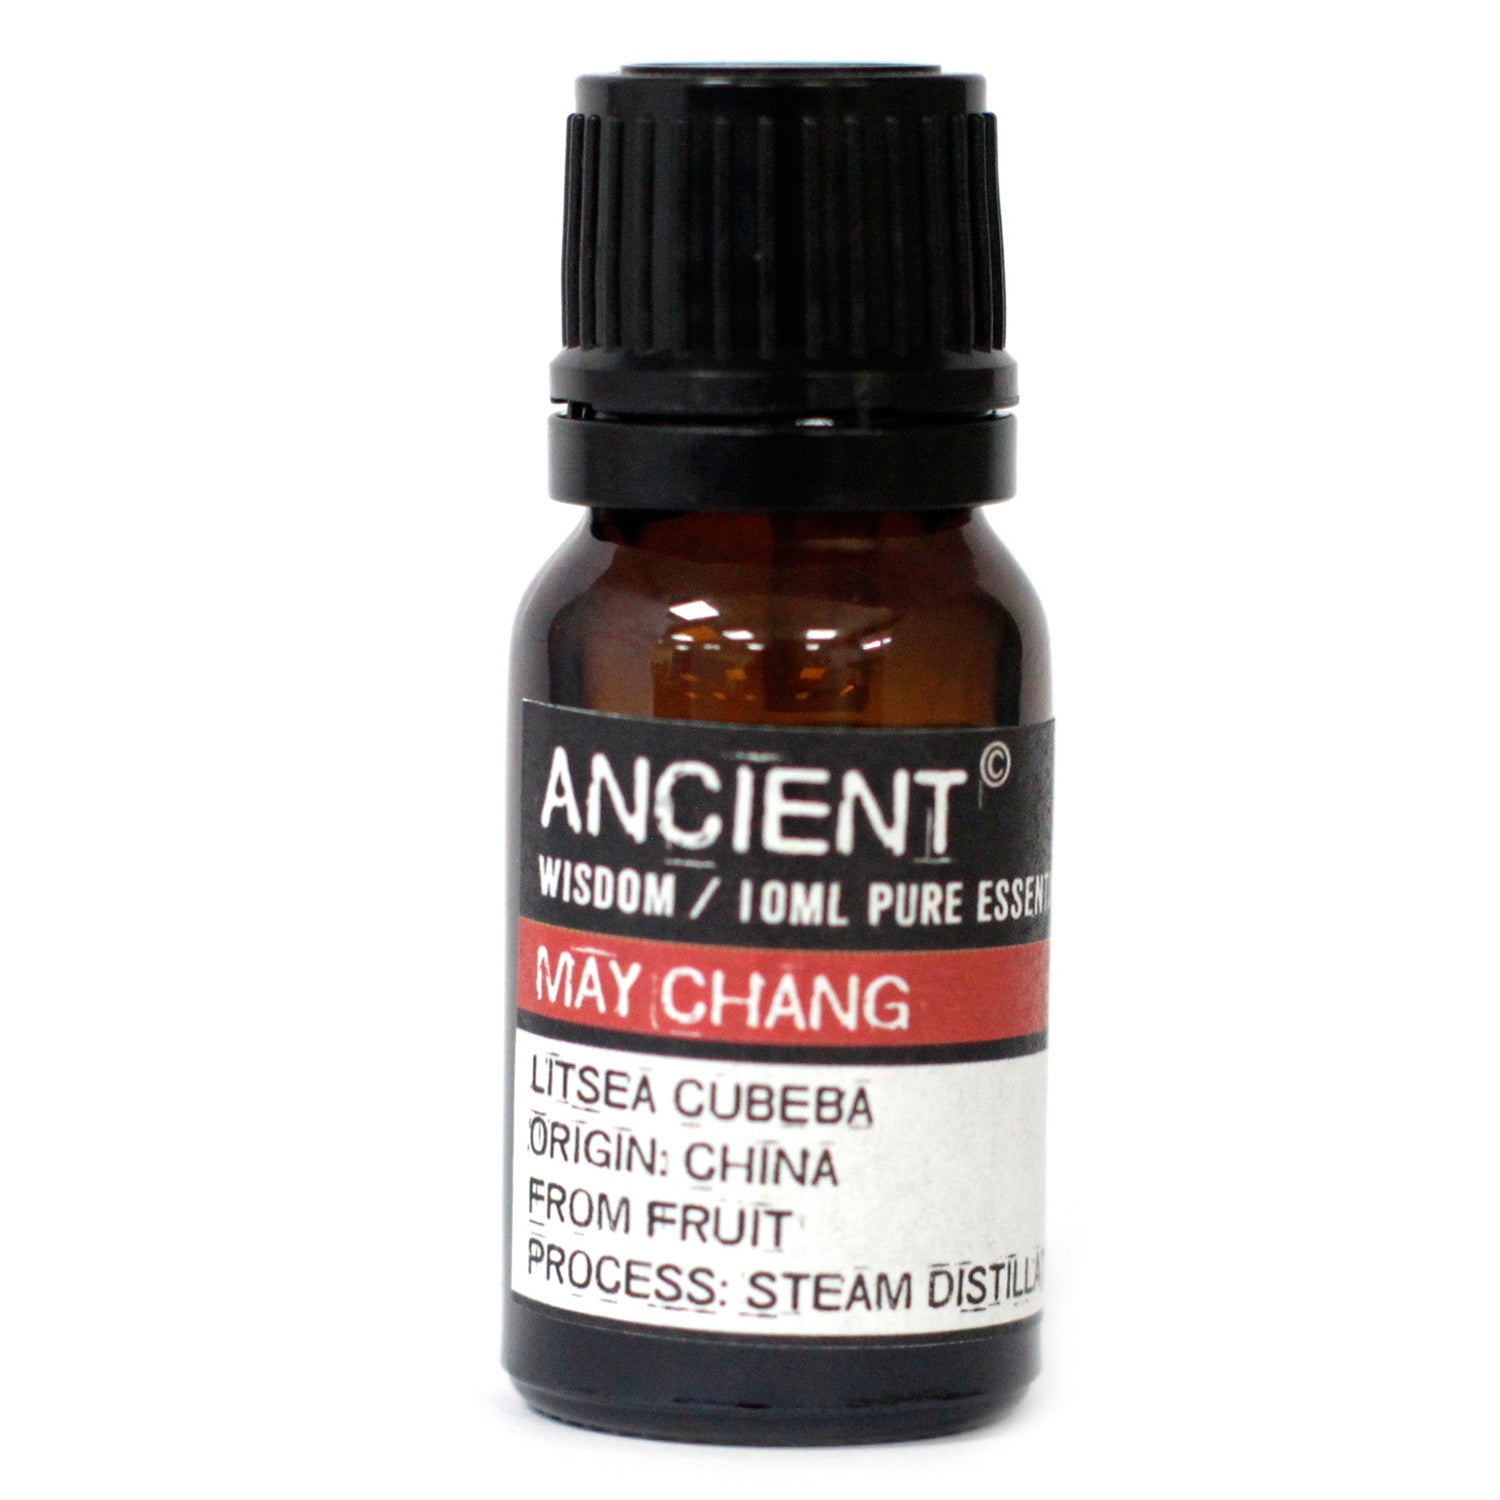 View 10 ml May Chang Essential Oil information